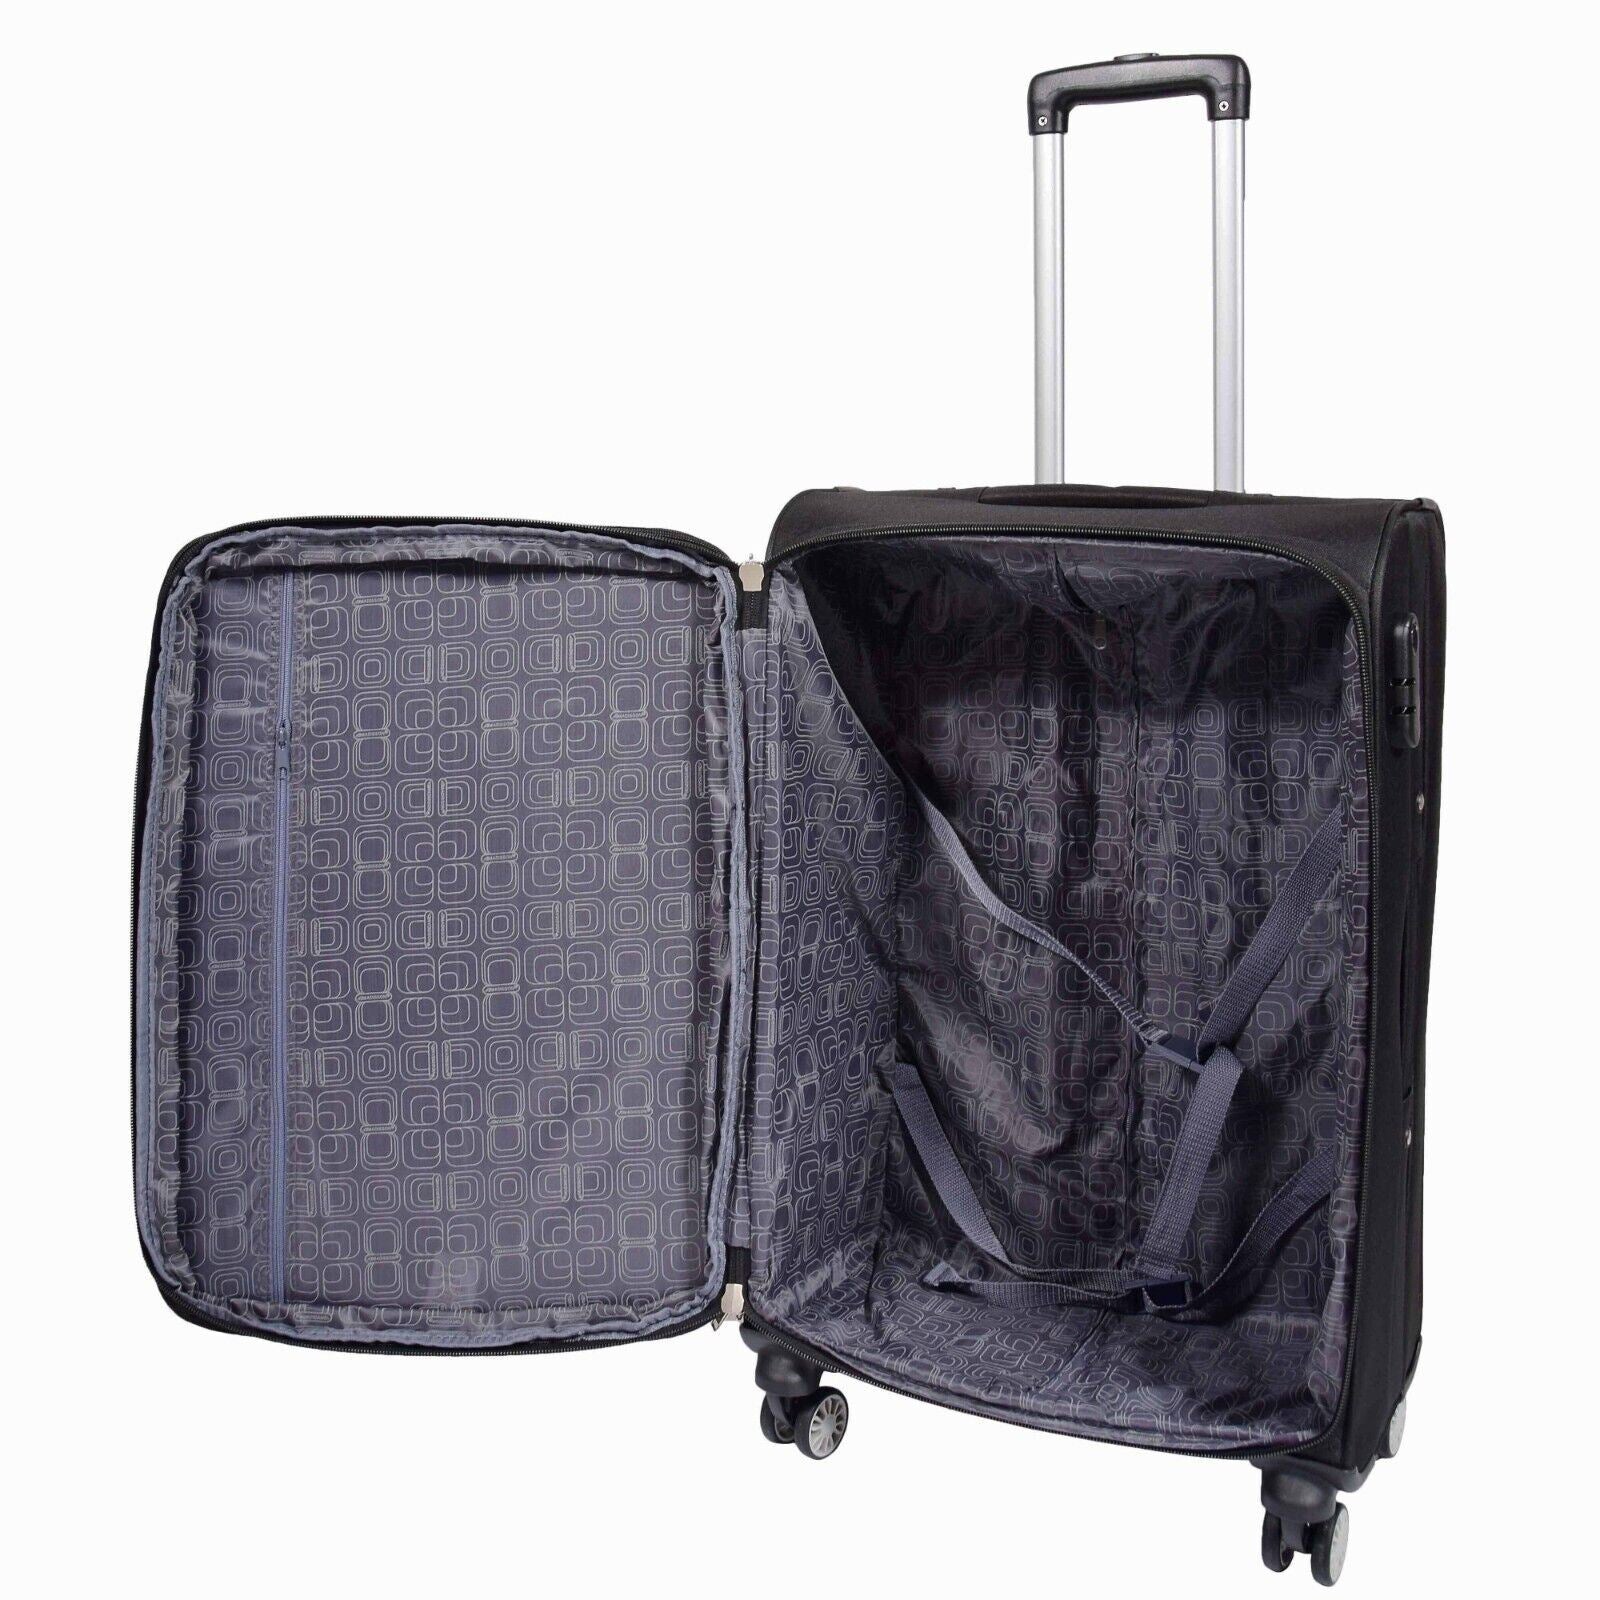 Lightweight Black Soft Casing Suitcases 8 Wheel Luggage Travel - Upperclass Fashions 